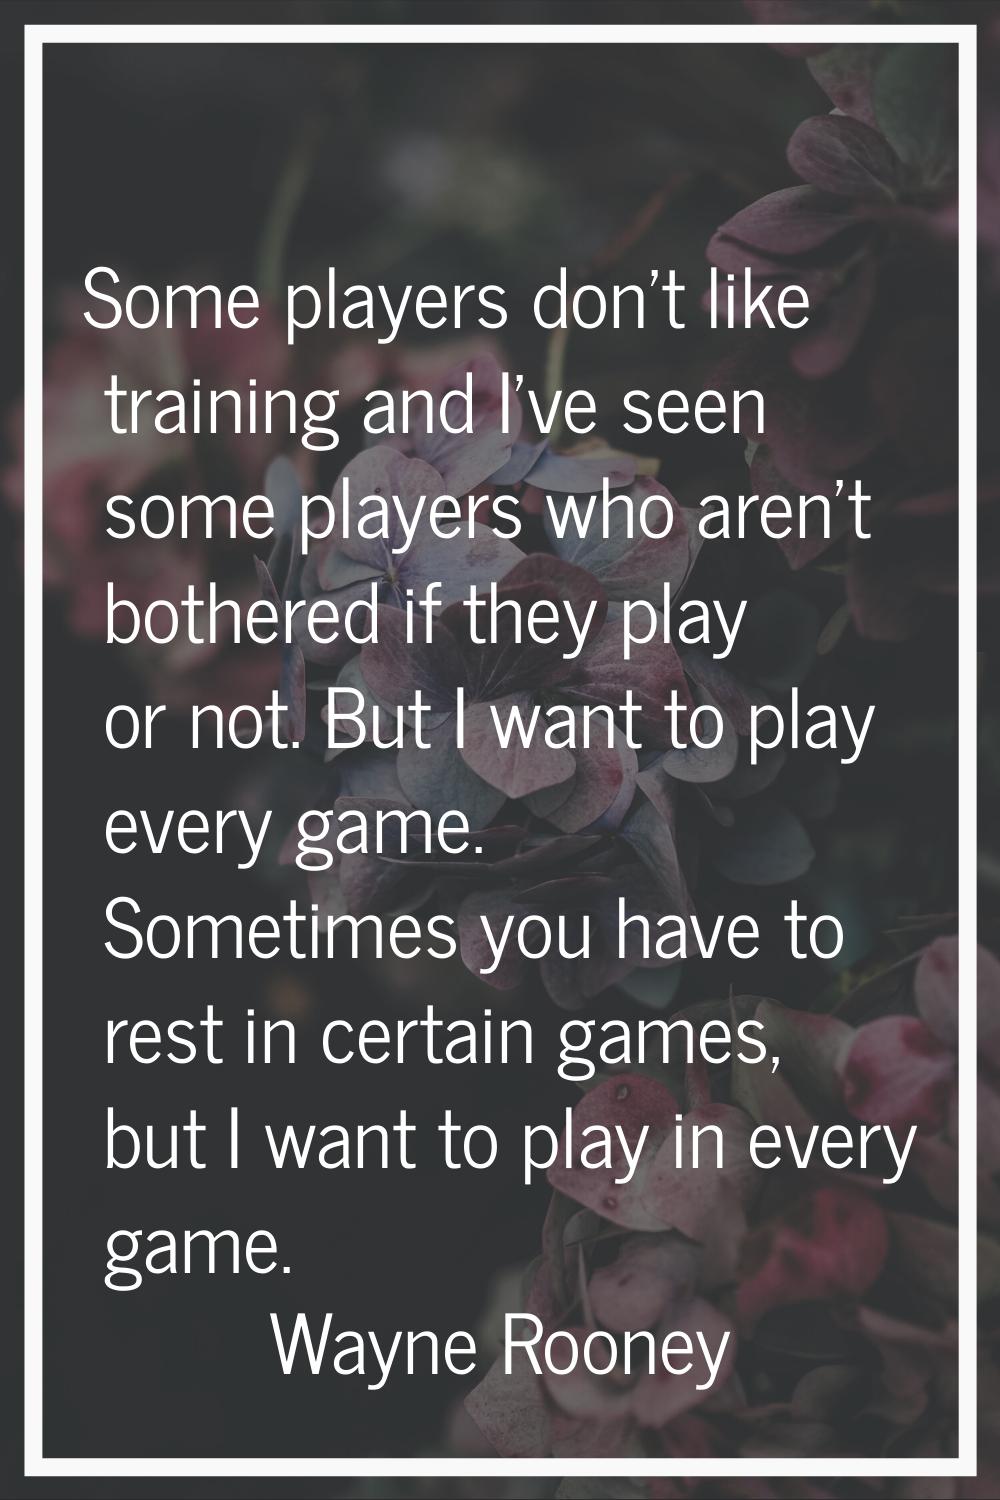 Some players don't like training and I've seen some players who aren't bothered if they play or not